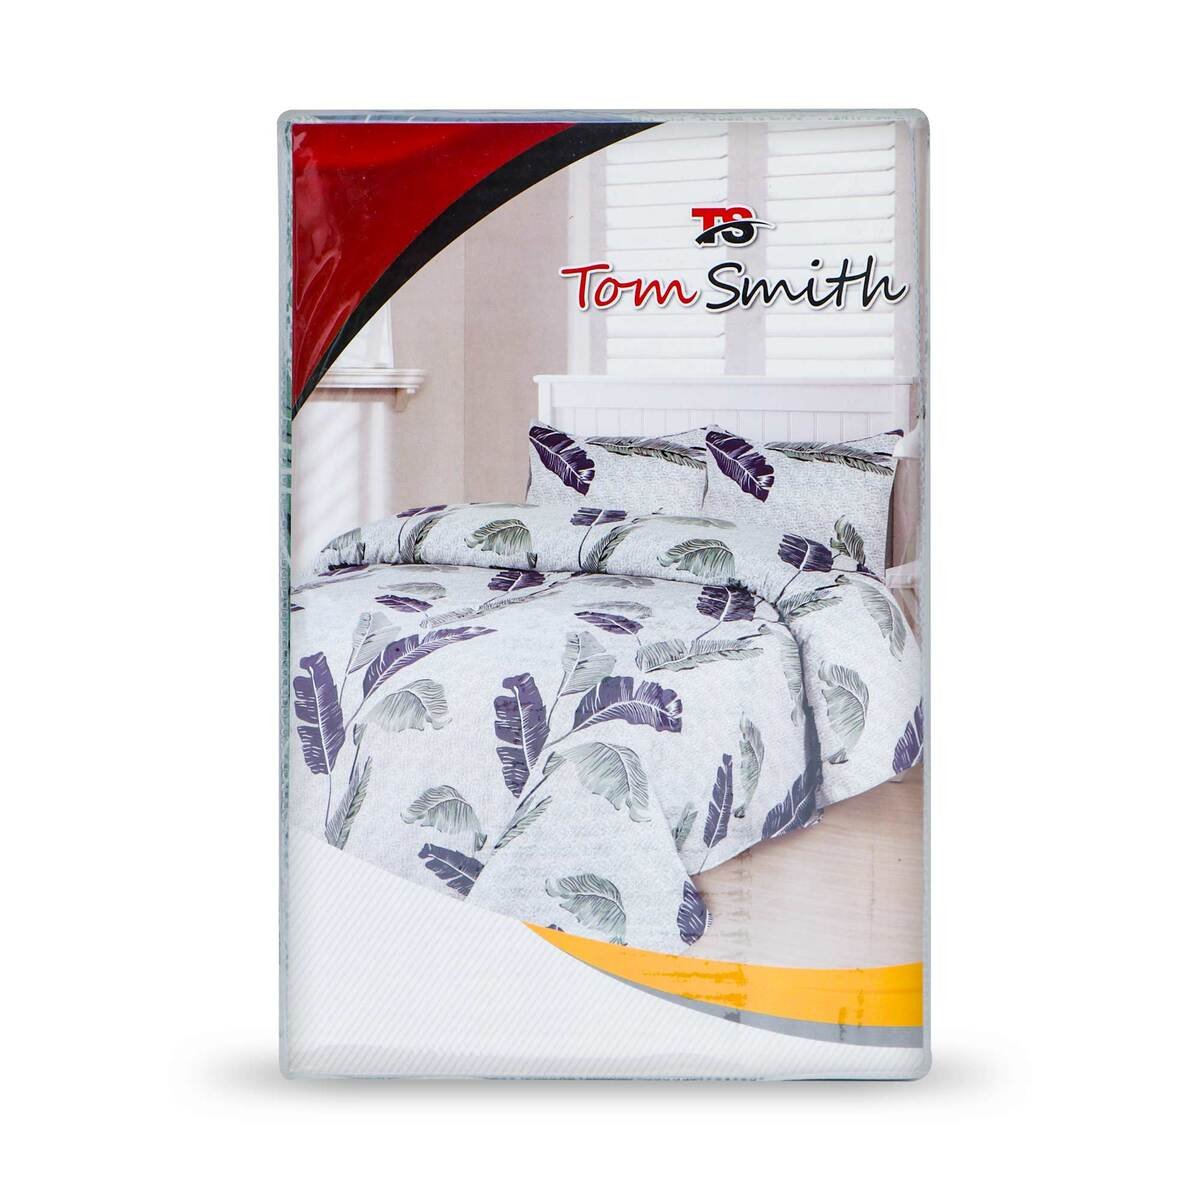 Tom Smith Bed Sheet Size: 150x240cm + Pillow Cover Leaf